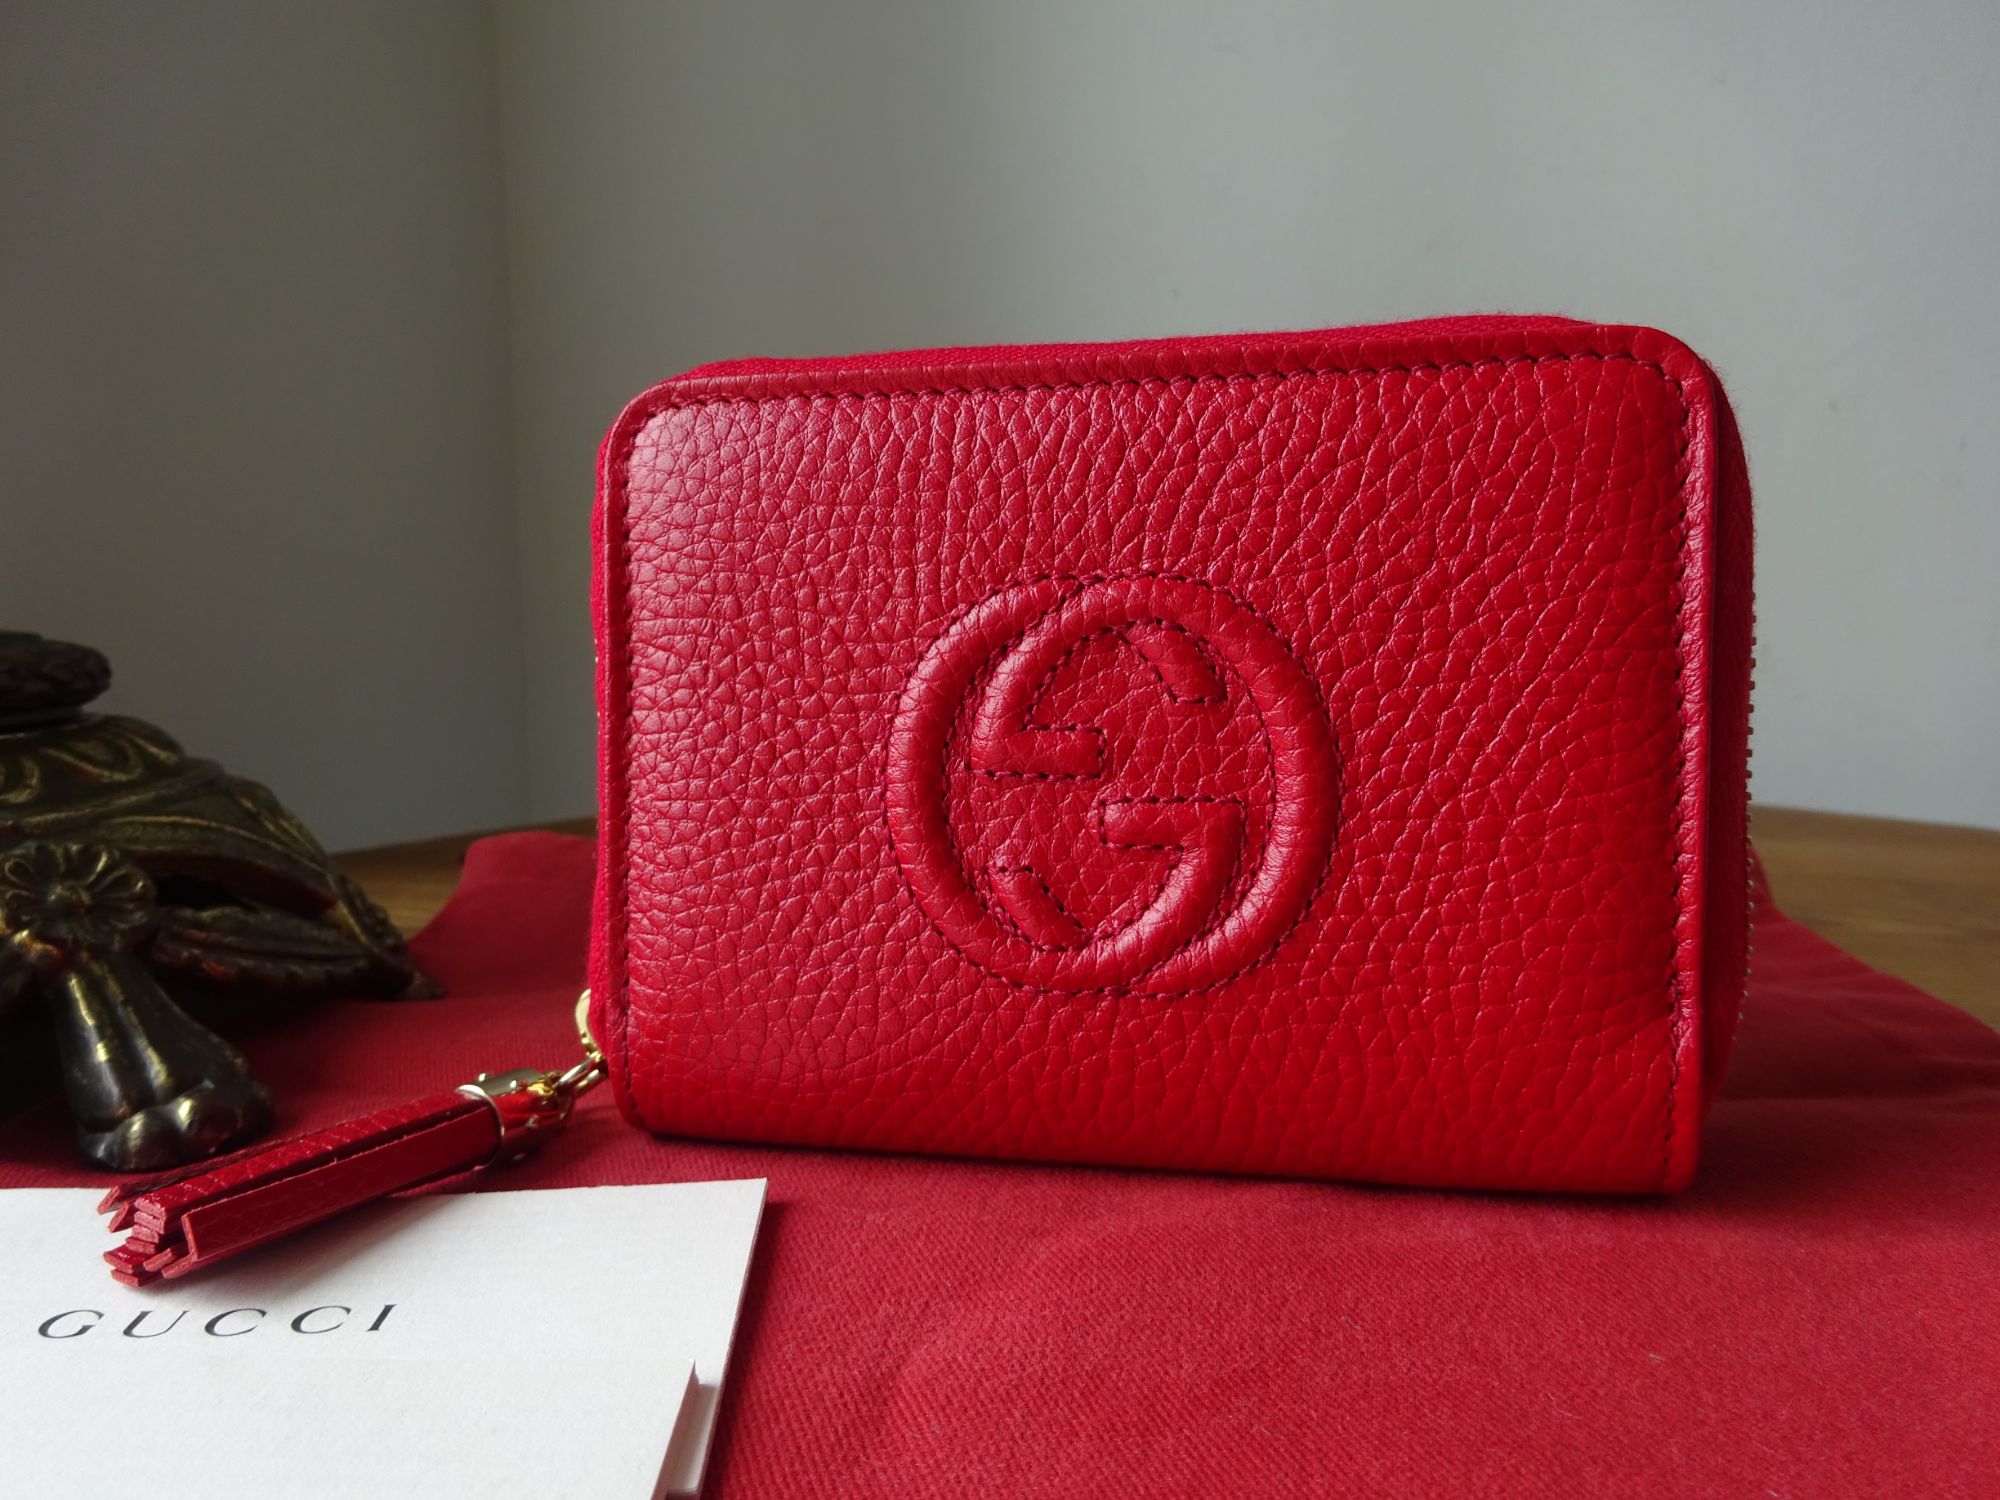 Gucci Soho Small Zip Around Card Coin Purse in Red Pebbled Calfskin